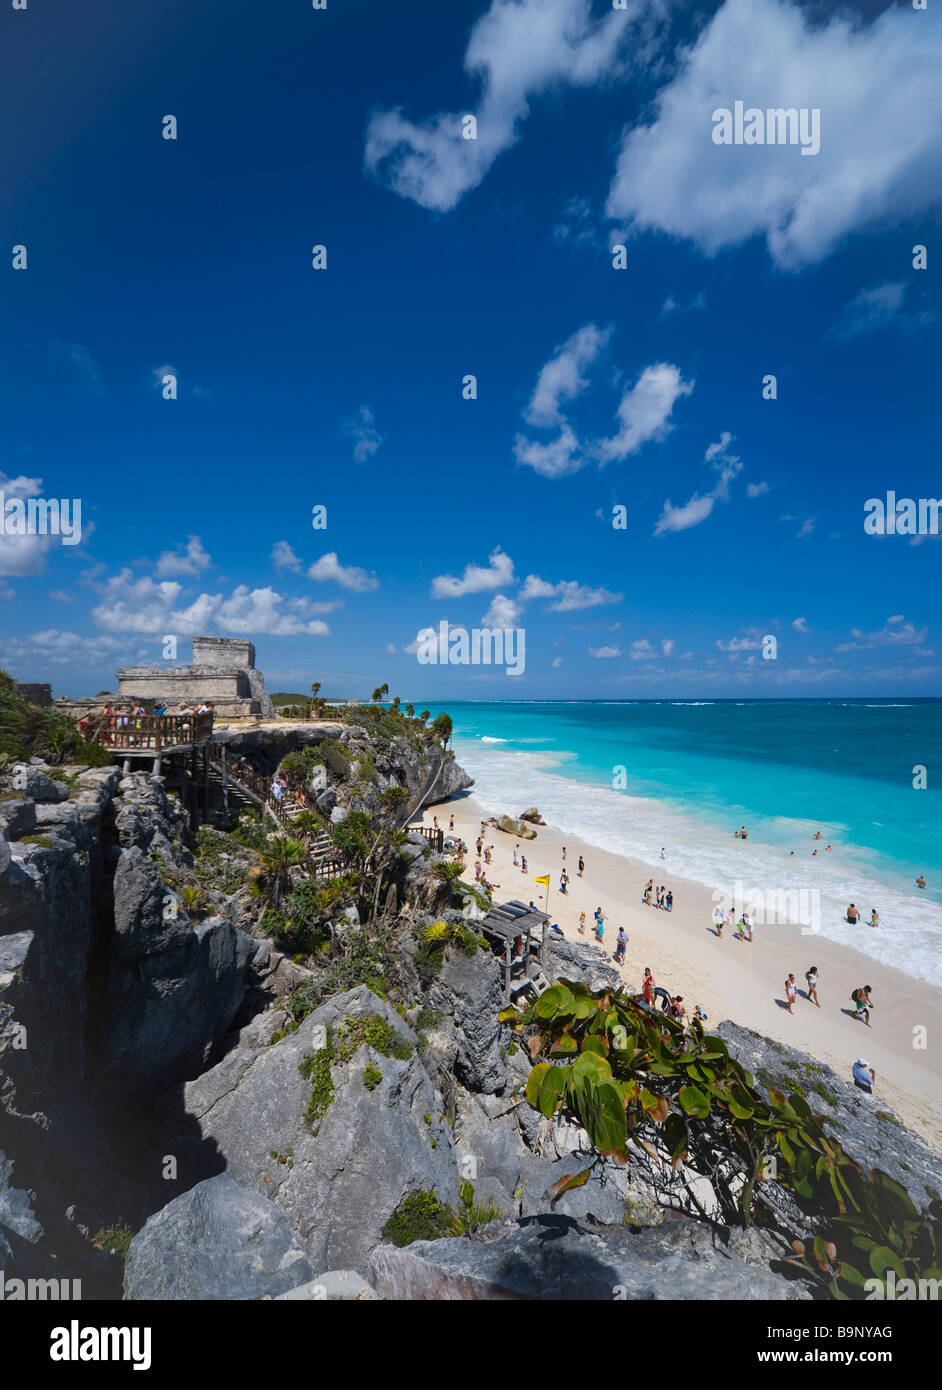 Mexico Yucatan - Tulum Xpu-Ha beach with the Castle of the ancient site to the left Stock Photo